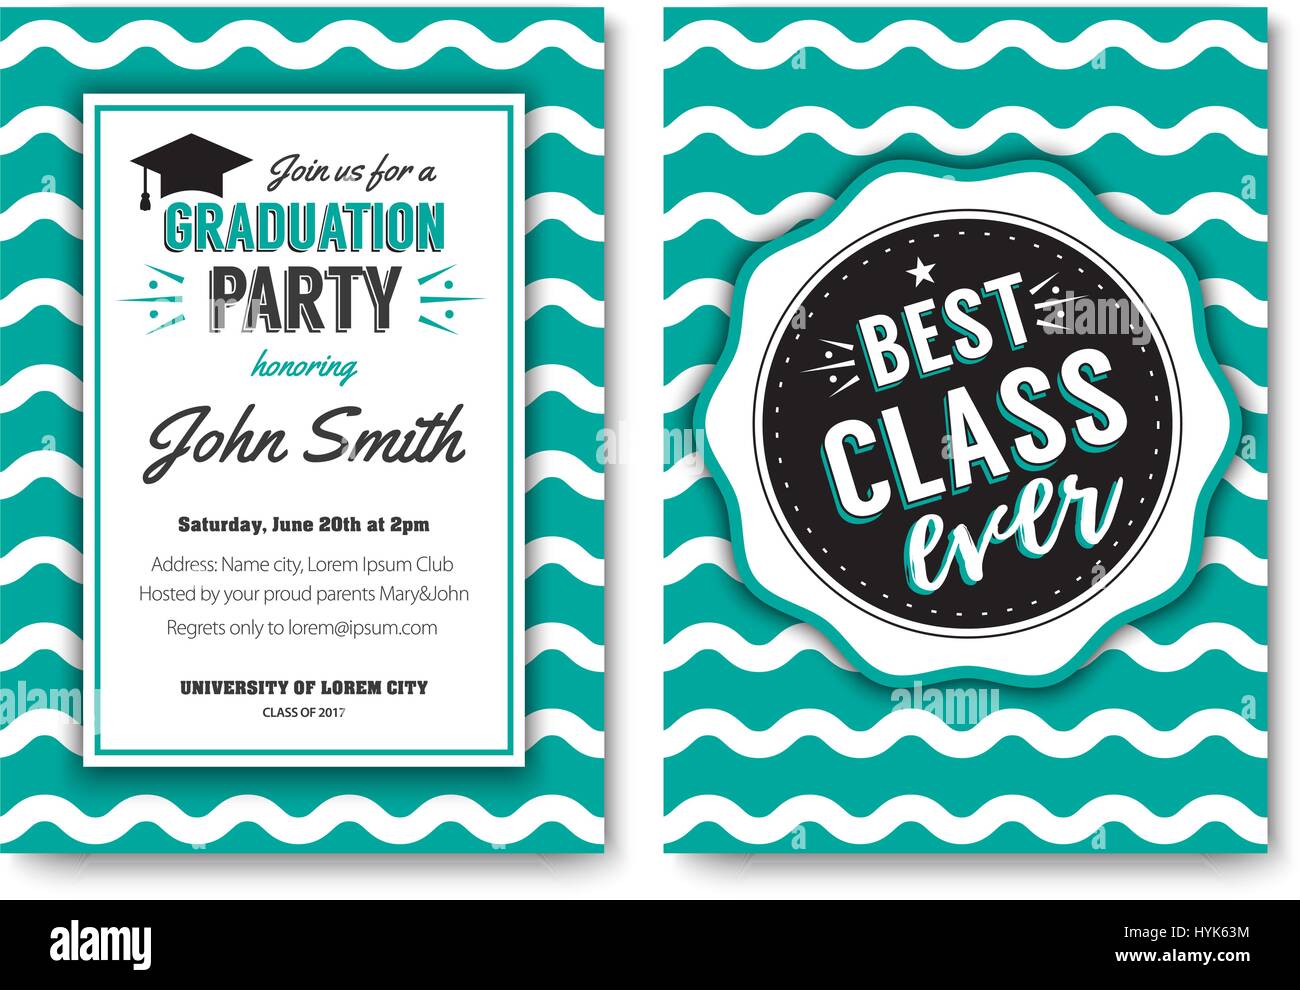 The party flyer layout Stock Vector